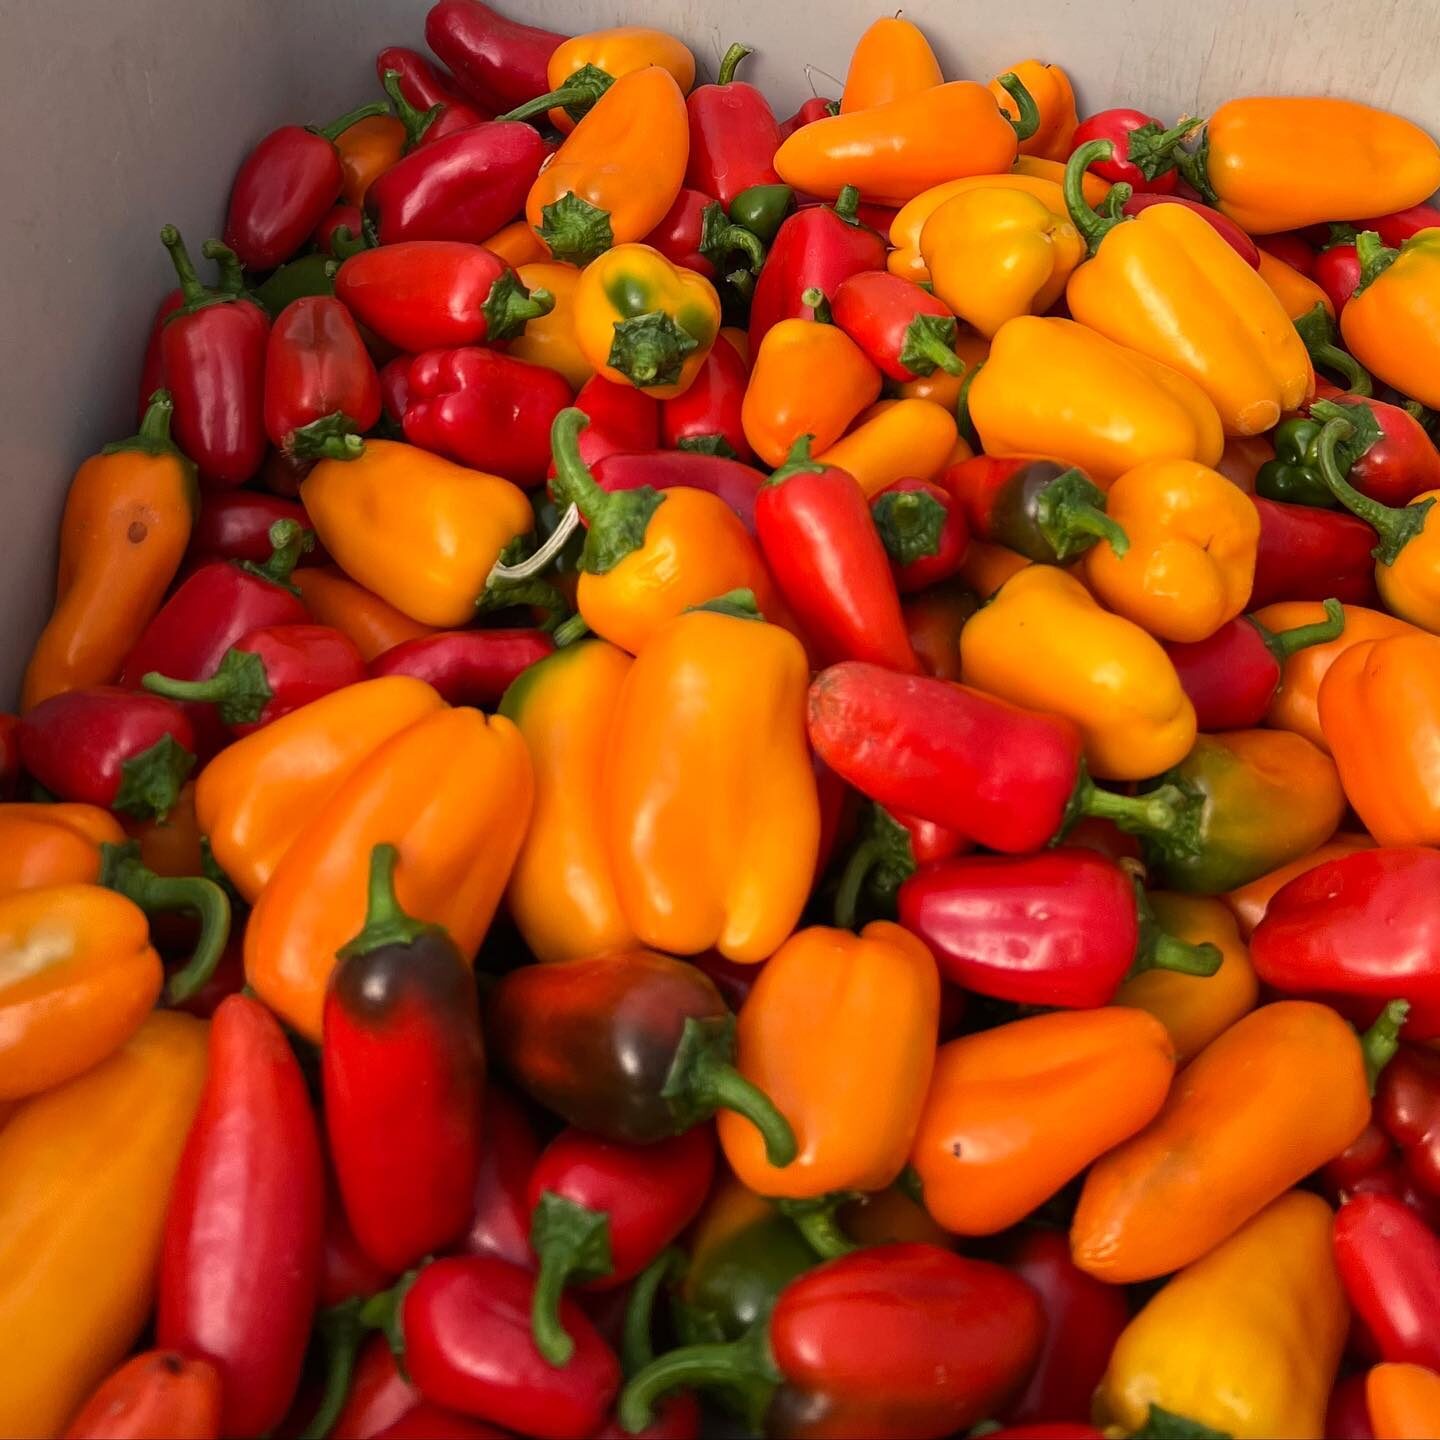 Bright and beautiful peppers available at Rocky Creek Farm on the Lewis and Clark National Historic Trail